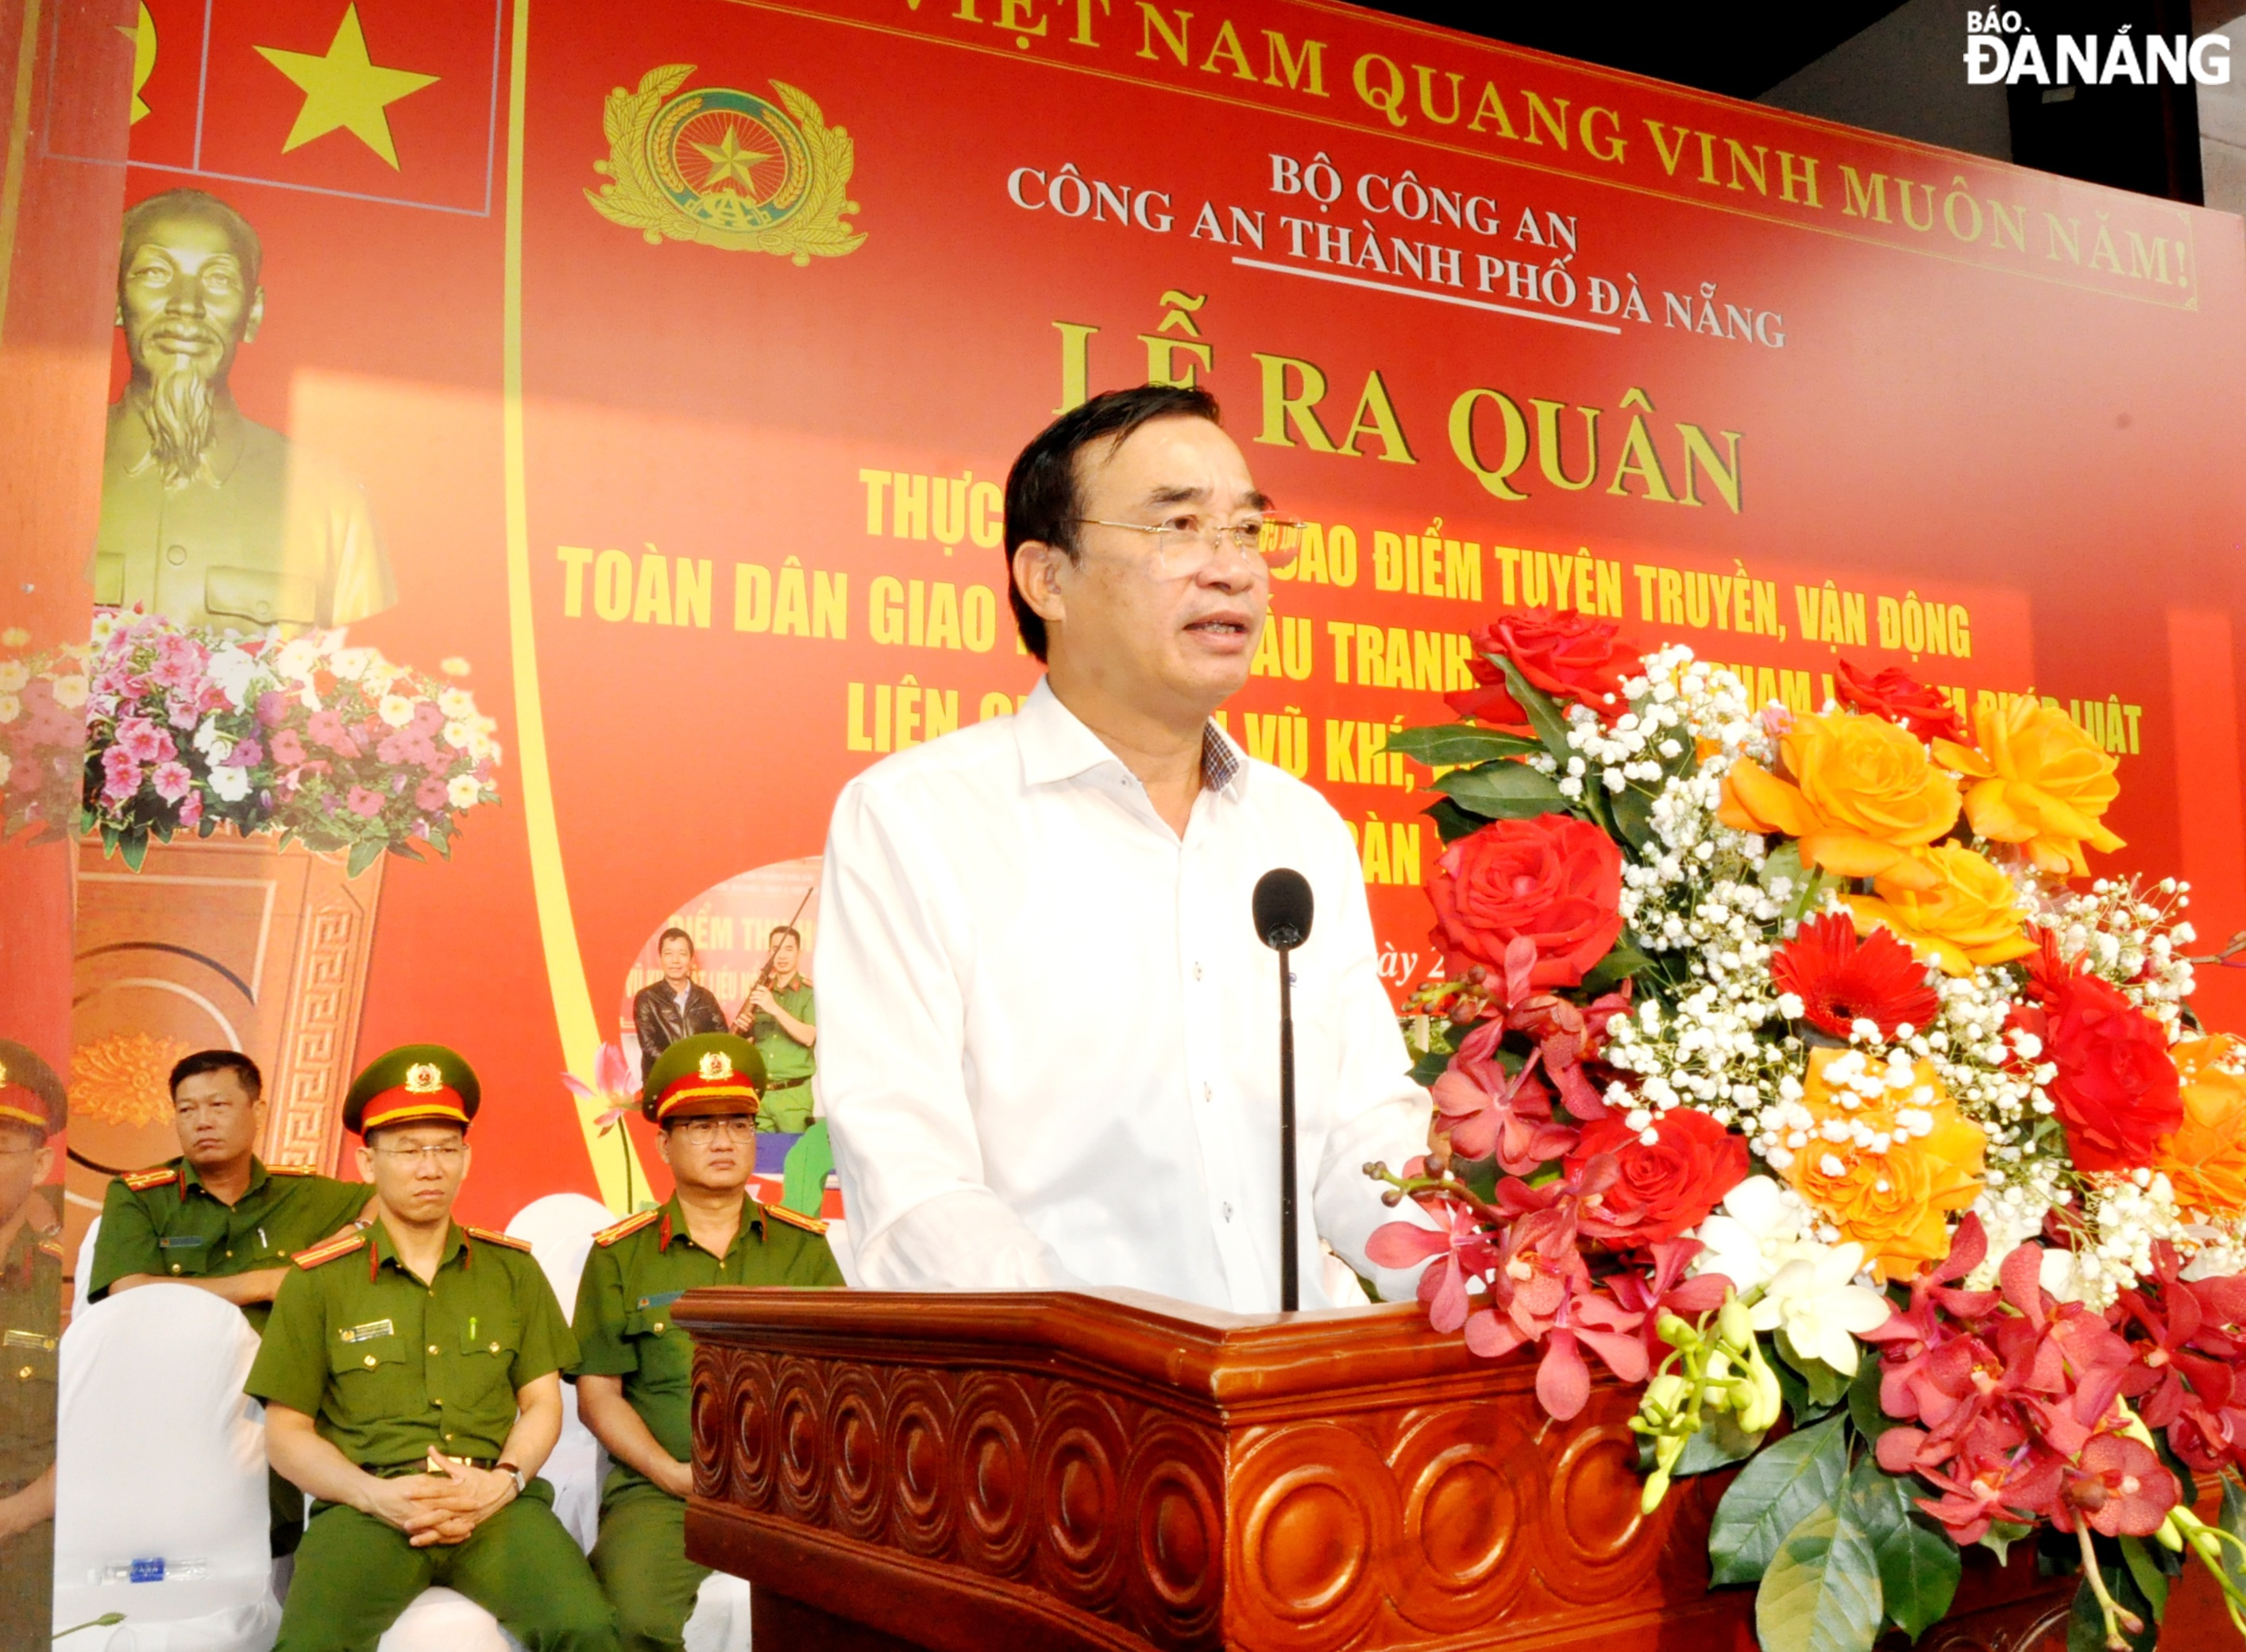 Da Nang People’s Committee Chairman Le Trung Chinh speaking at the launching ceremony